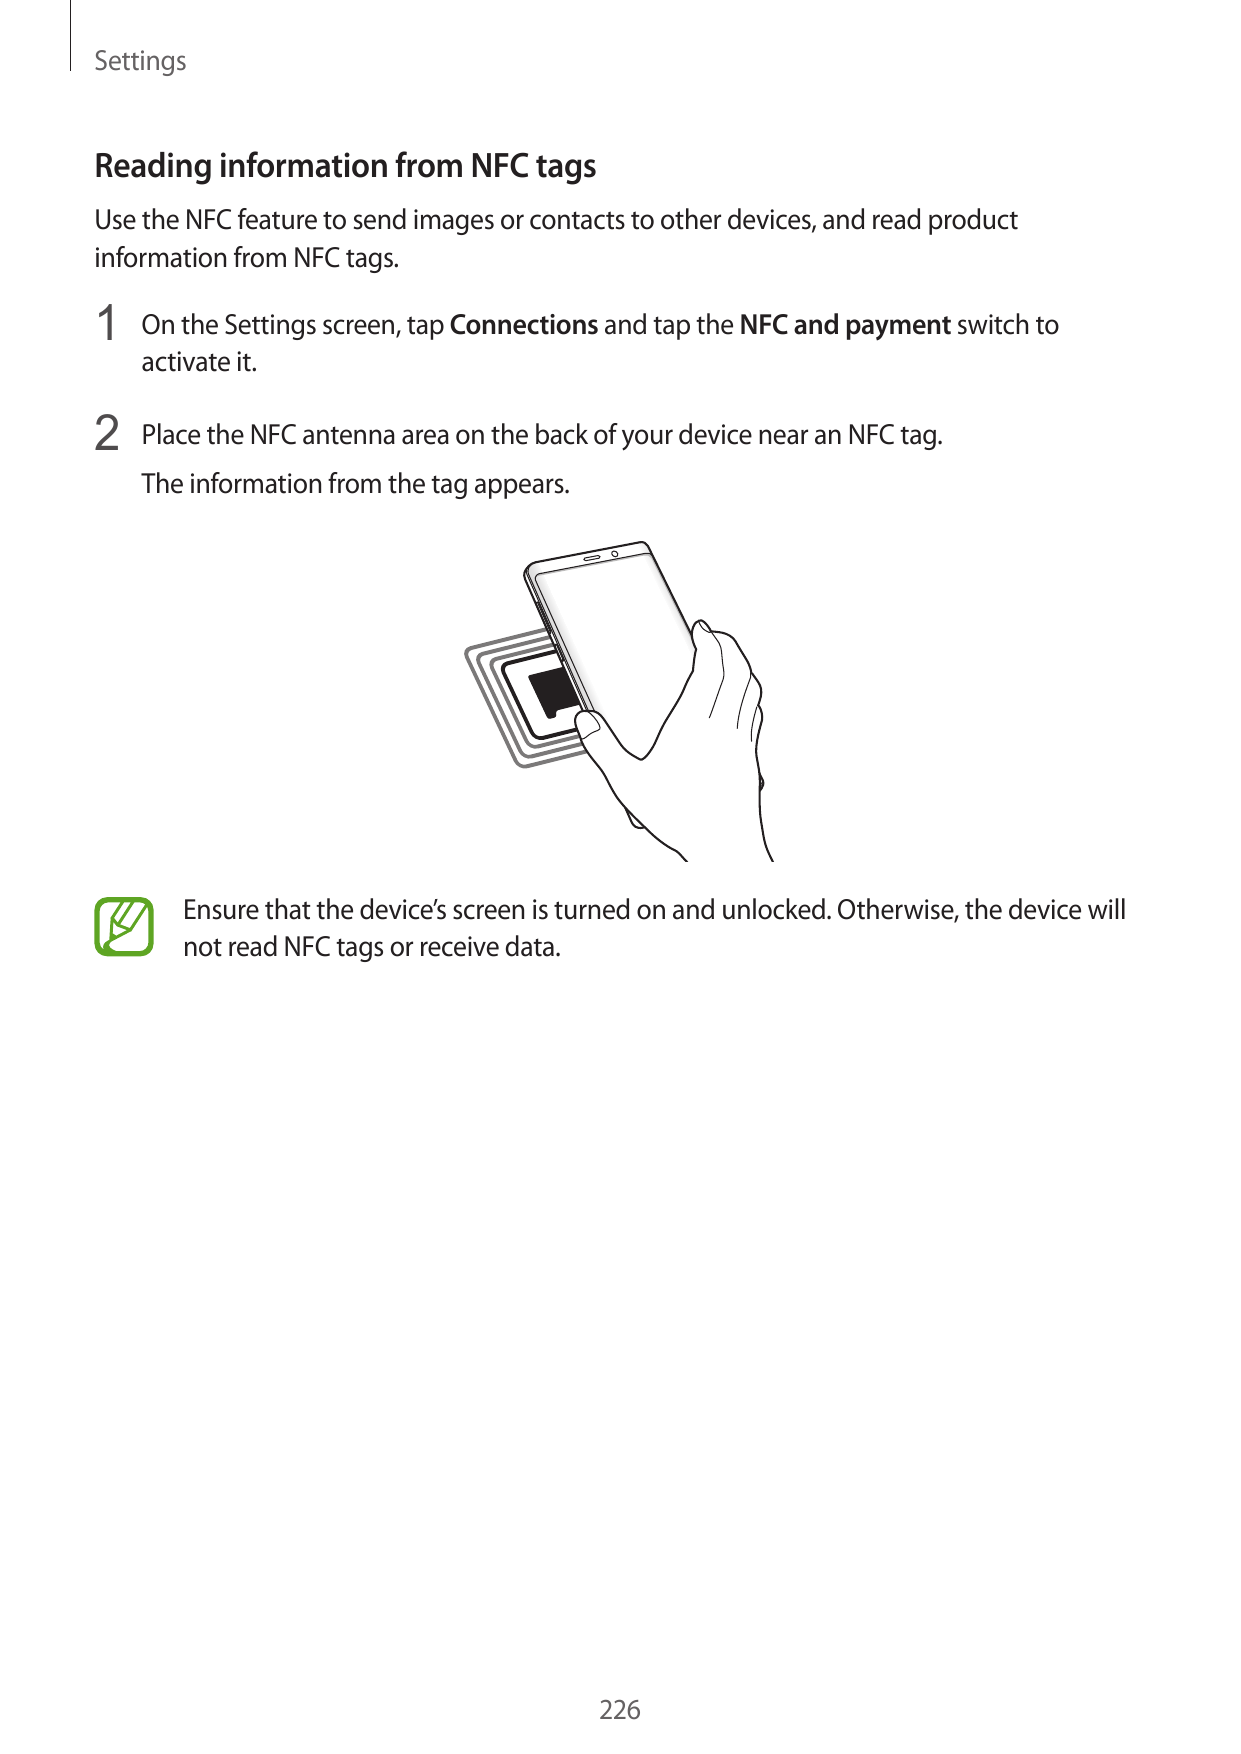 SettingsReading information from NFC tagsUse the NFC feature to send images or contacts to other devices, and read productinform